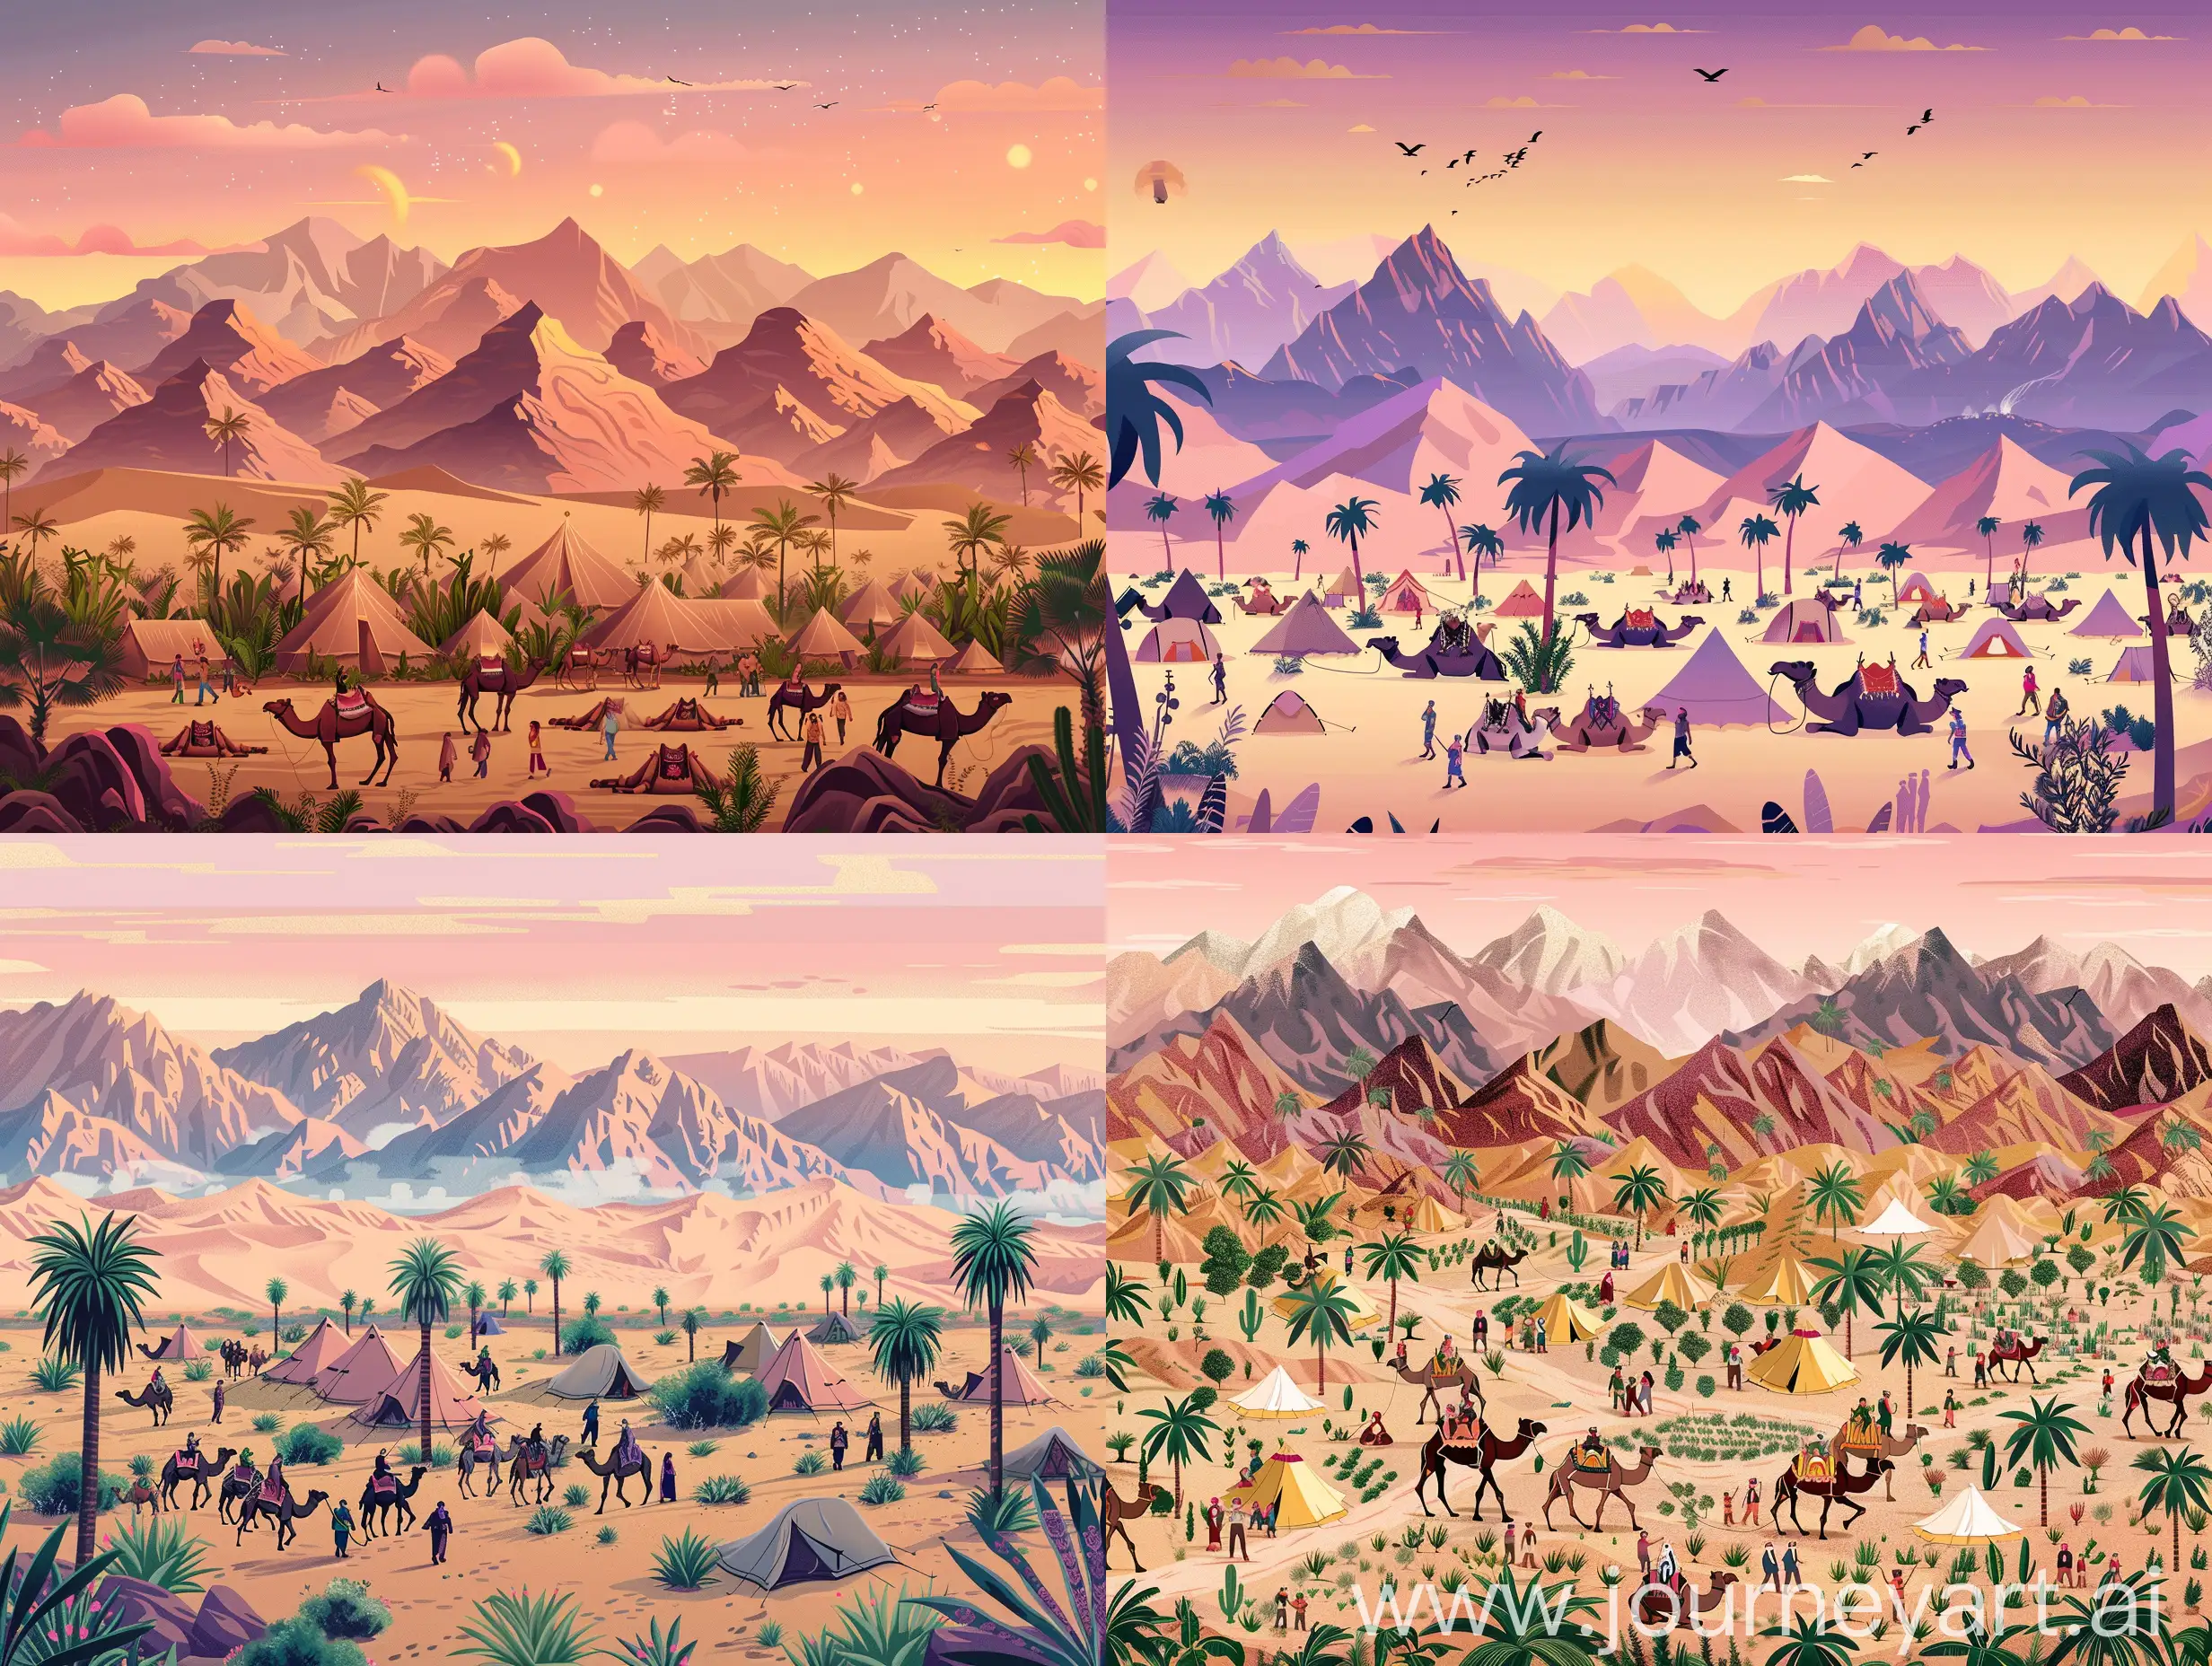 A wide scene in the desert, with many mountains and plantings, a lot of camels, people walking behind them, and they are very happy with tents and palm trees and camels lying down at sunrise time with pink sky and mountains in the background